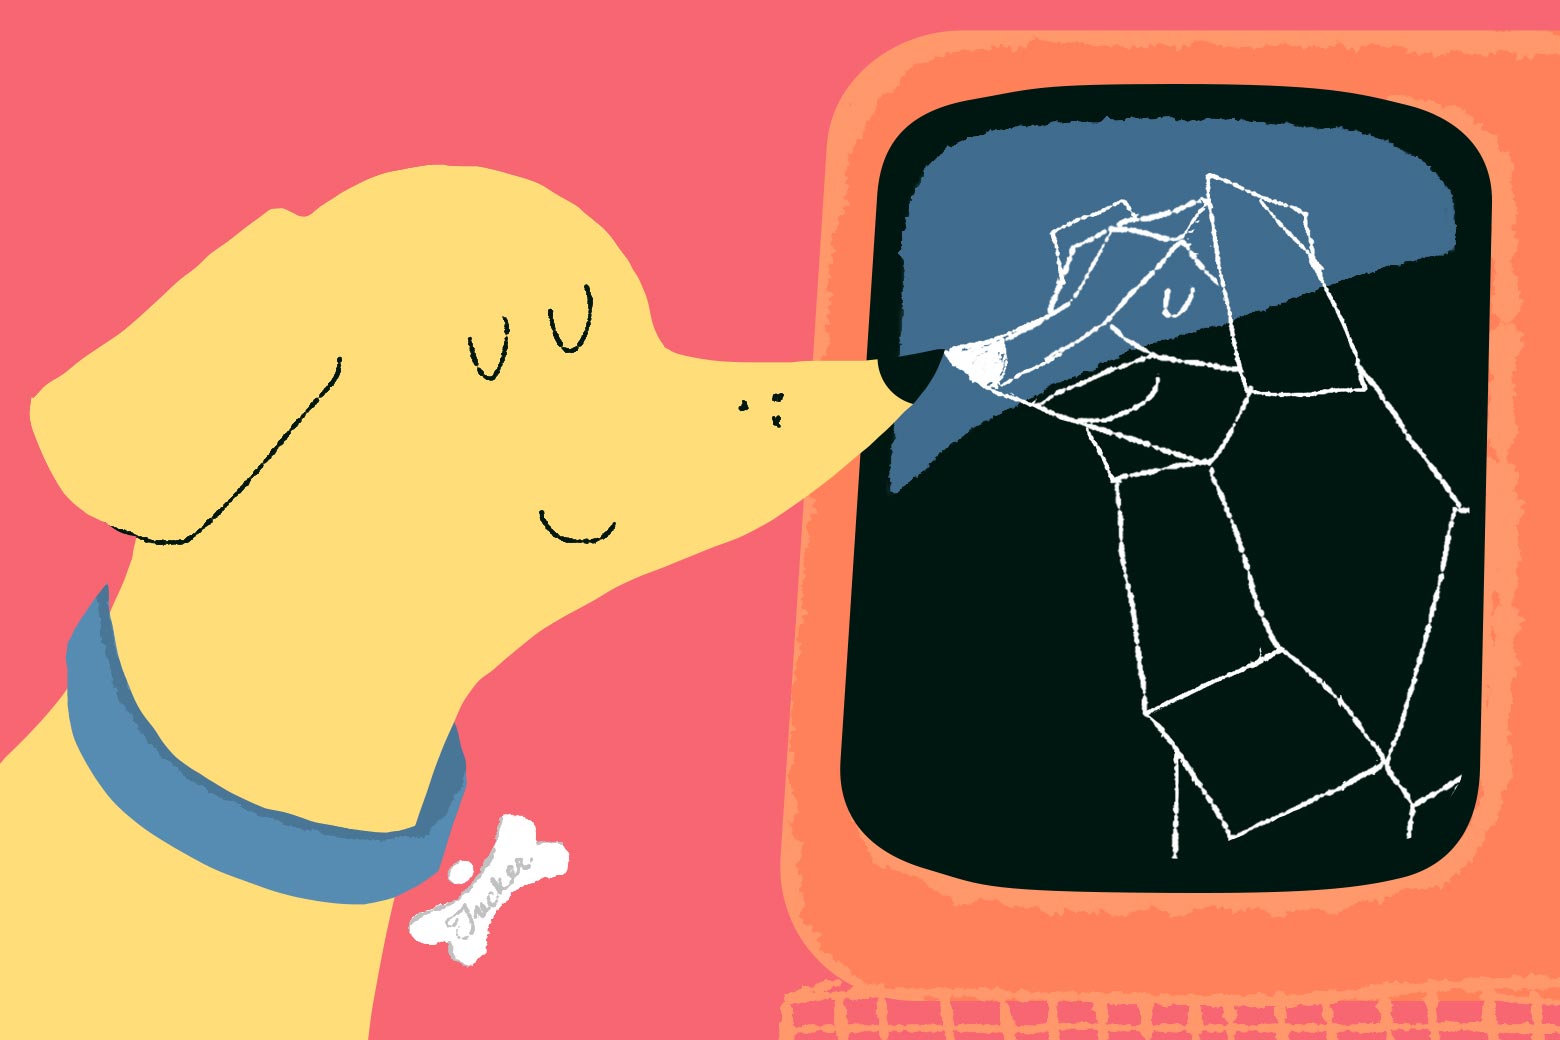 A dog touches its nose to a screen where a drawing of a different dog touches its own nose back.